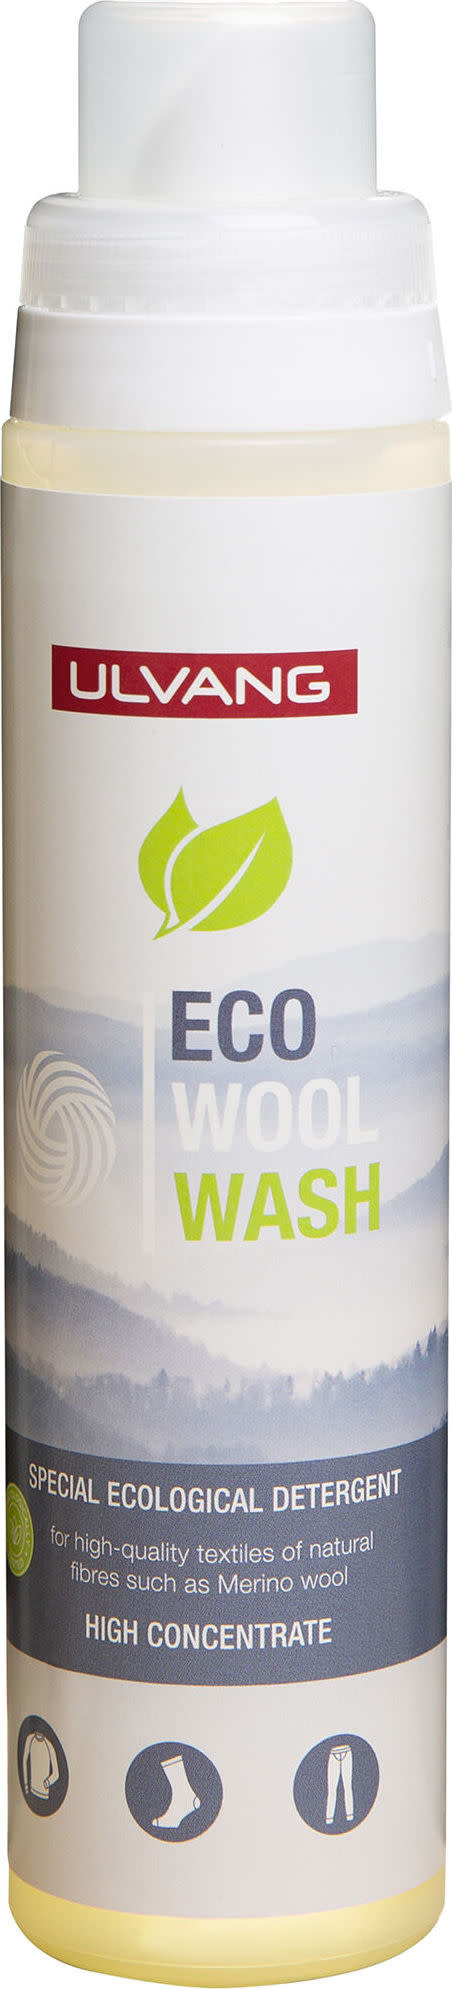 Ulvang Eco Wool Wash 250 ml Unspecified